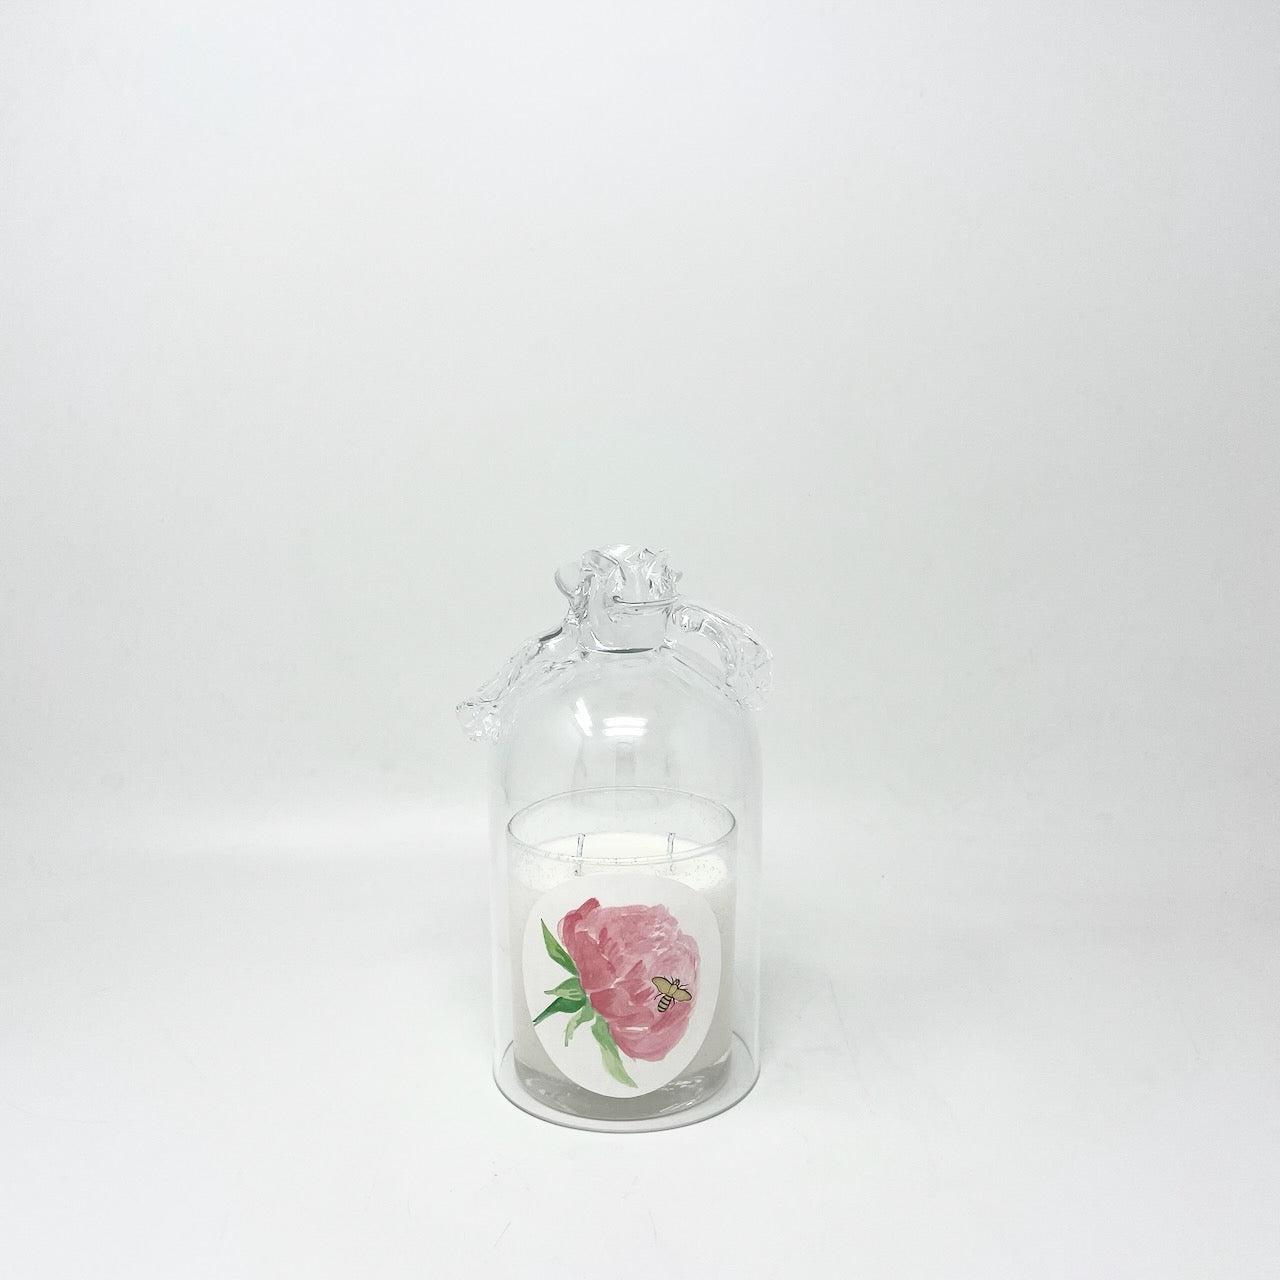 Rose-handle glass bell cloche